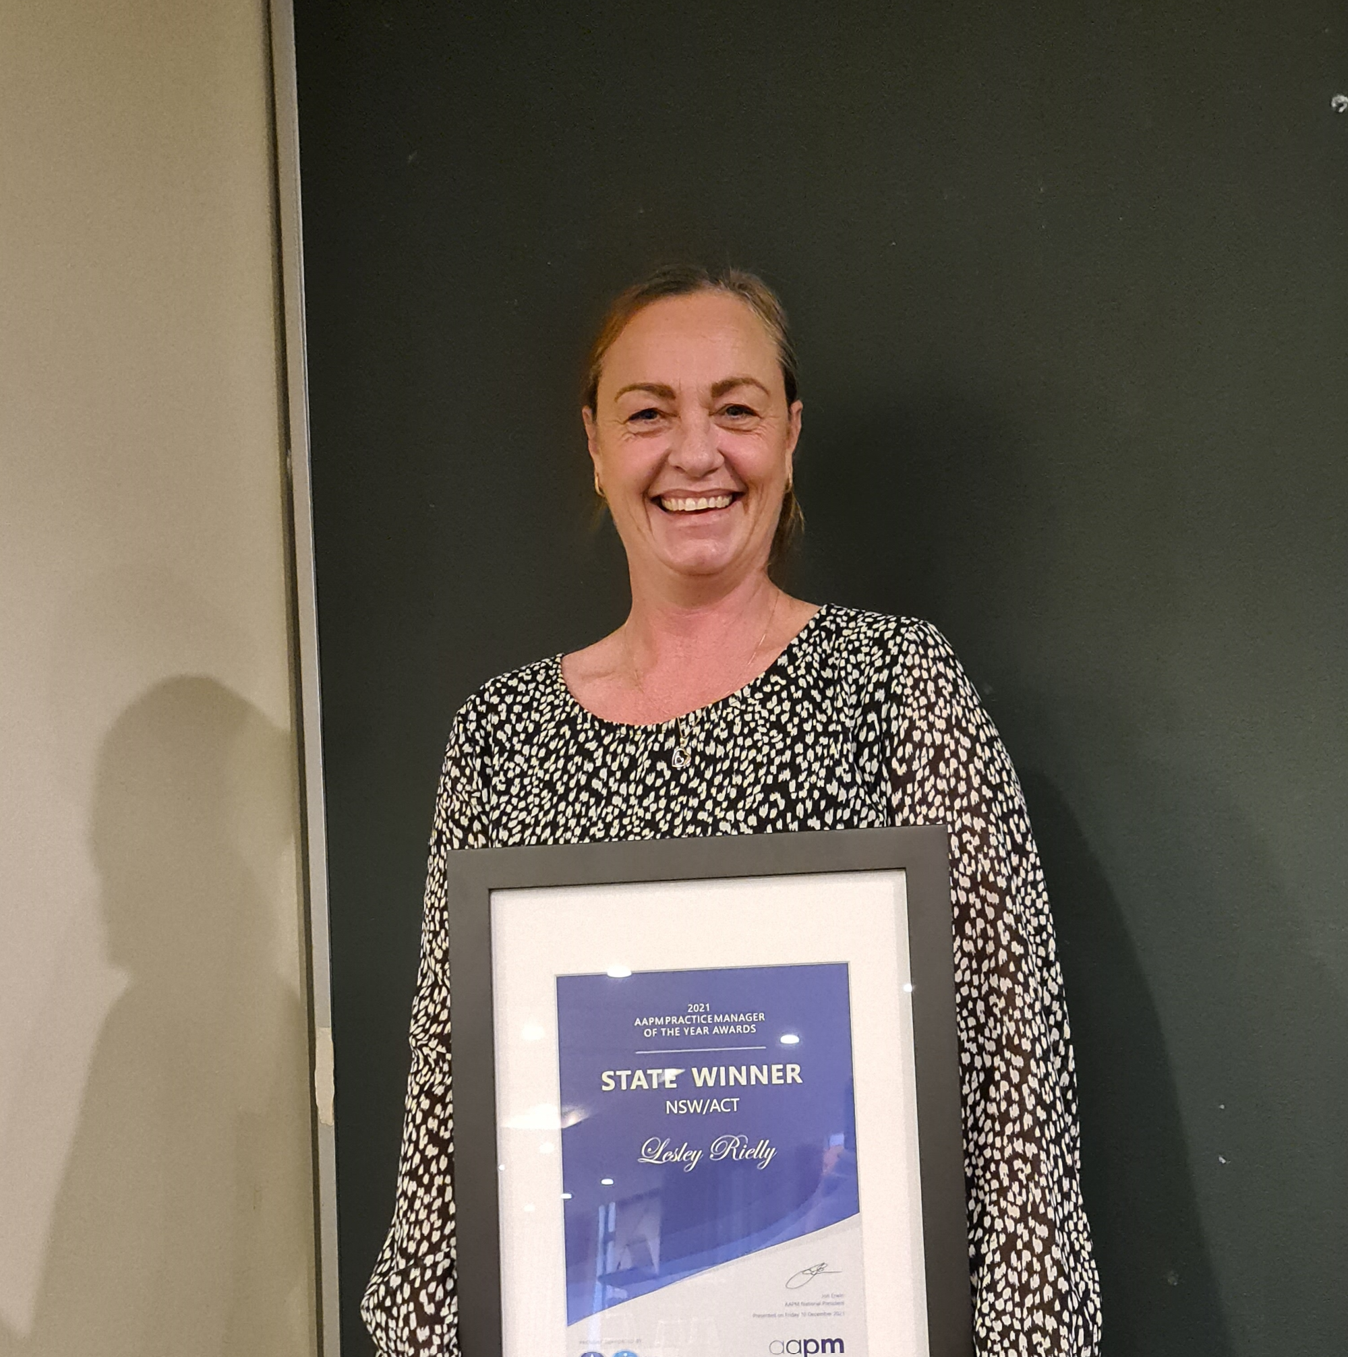 Local Practice Manager Lesley Riley wins AAPM Award